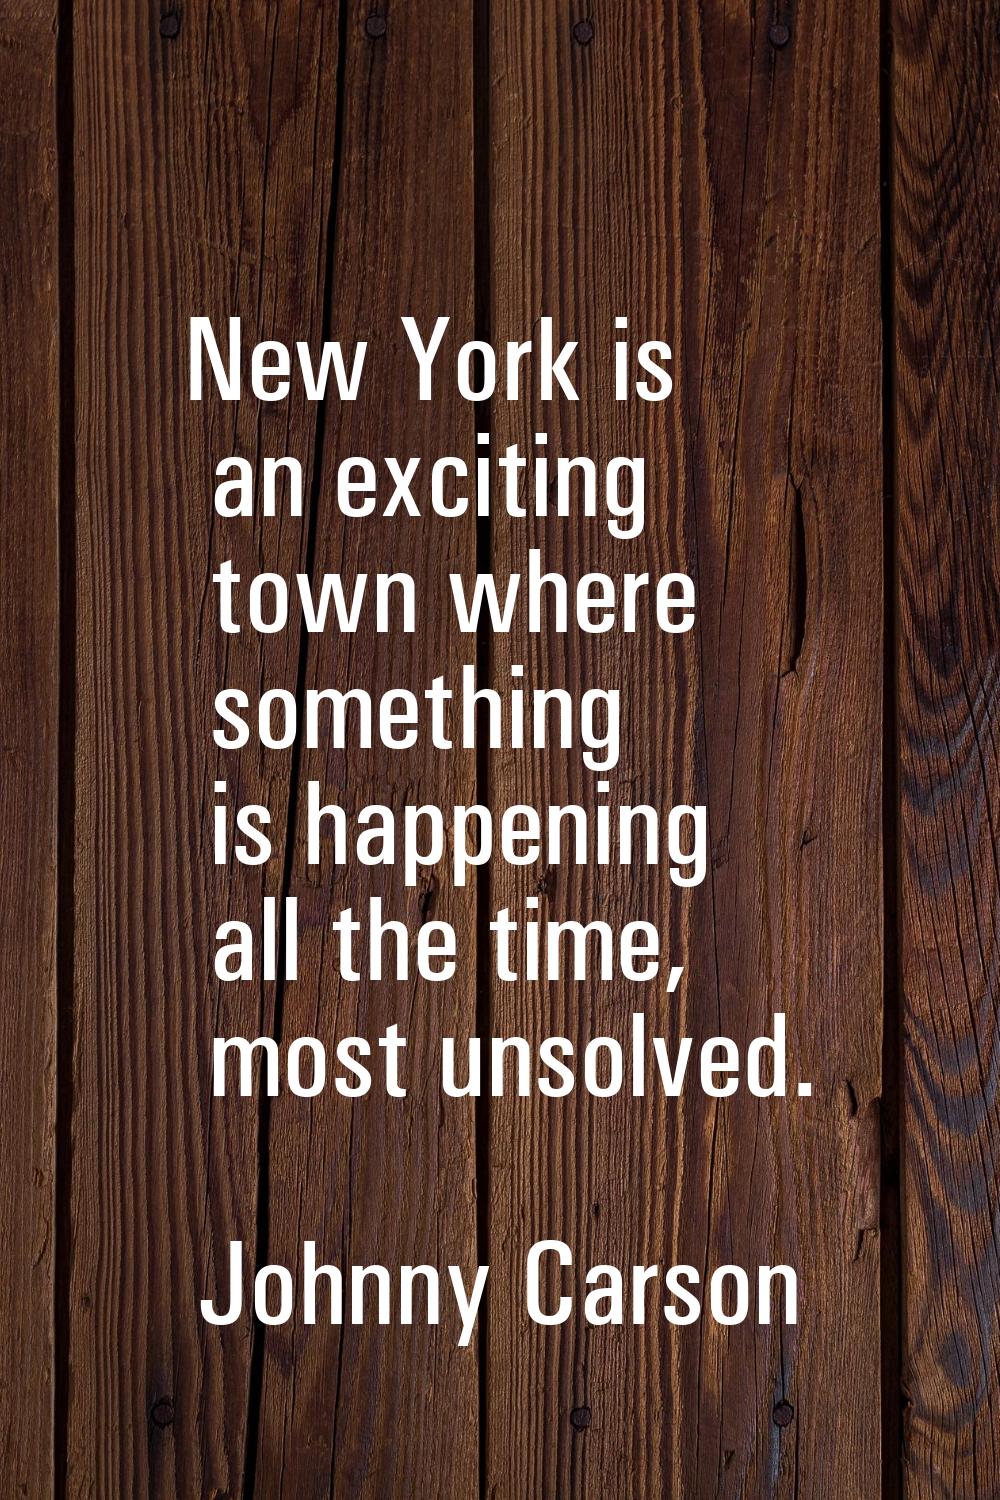 New York is an exciting town where something is happening all the time, most unsolved.